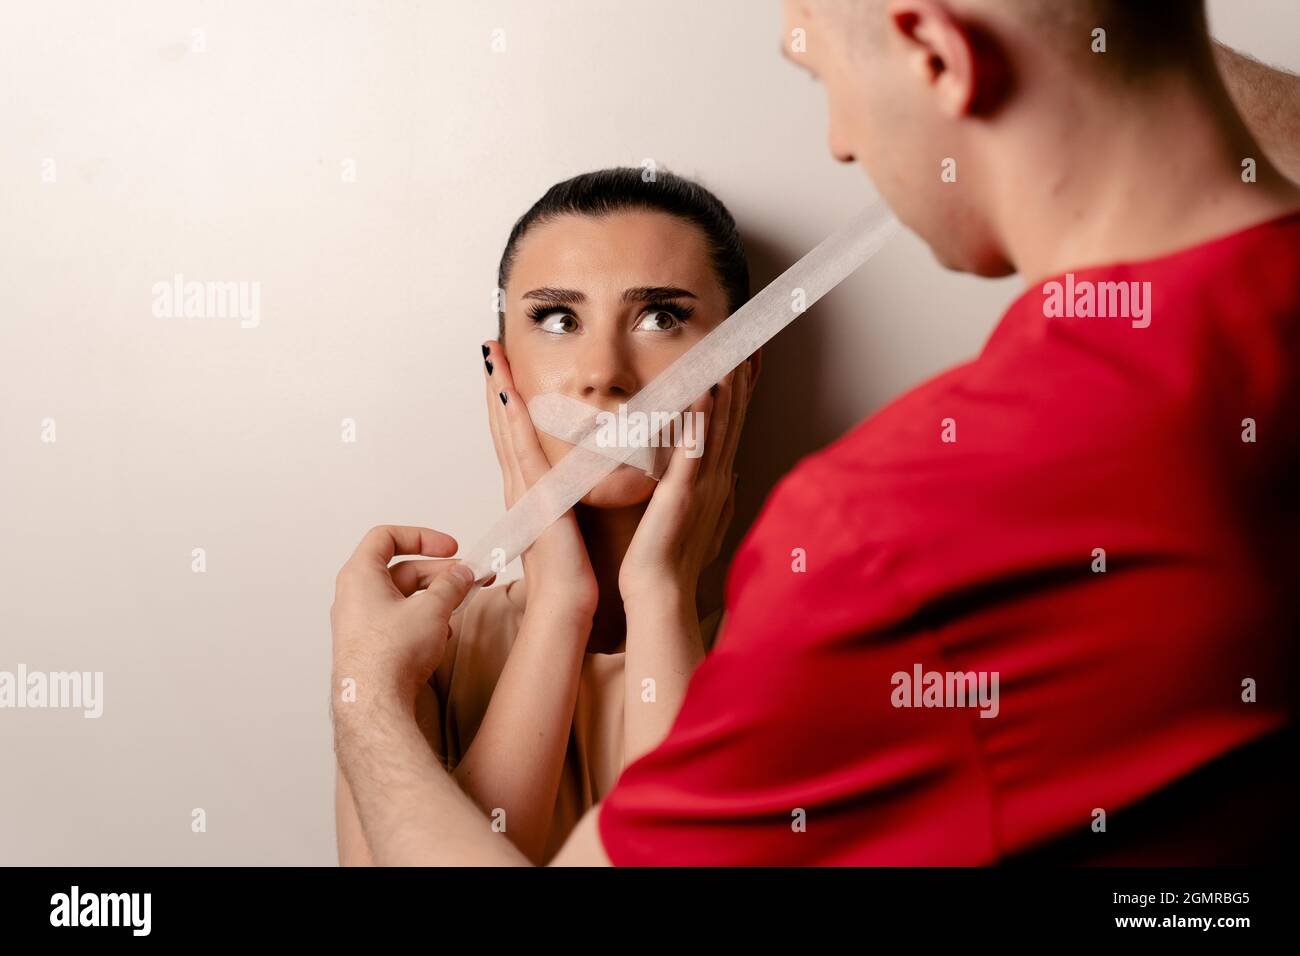 Model with glued mouth. Man covers woman mouth with tape. Stop talking Stock Photo